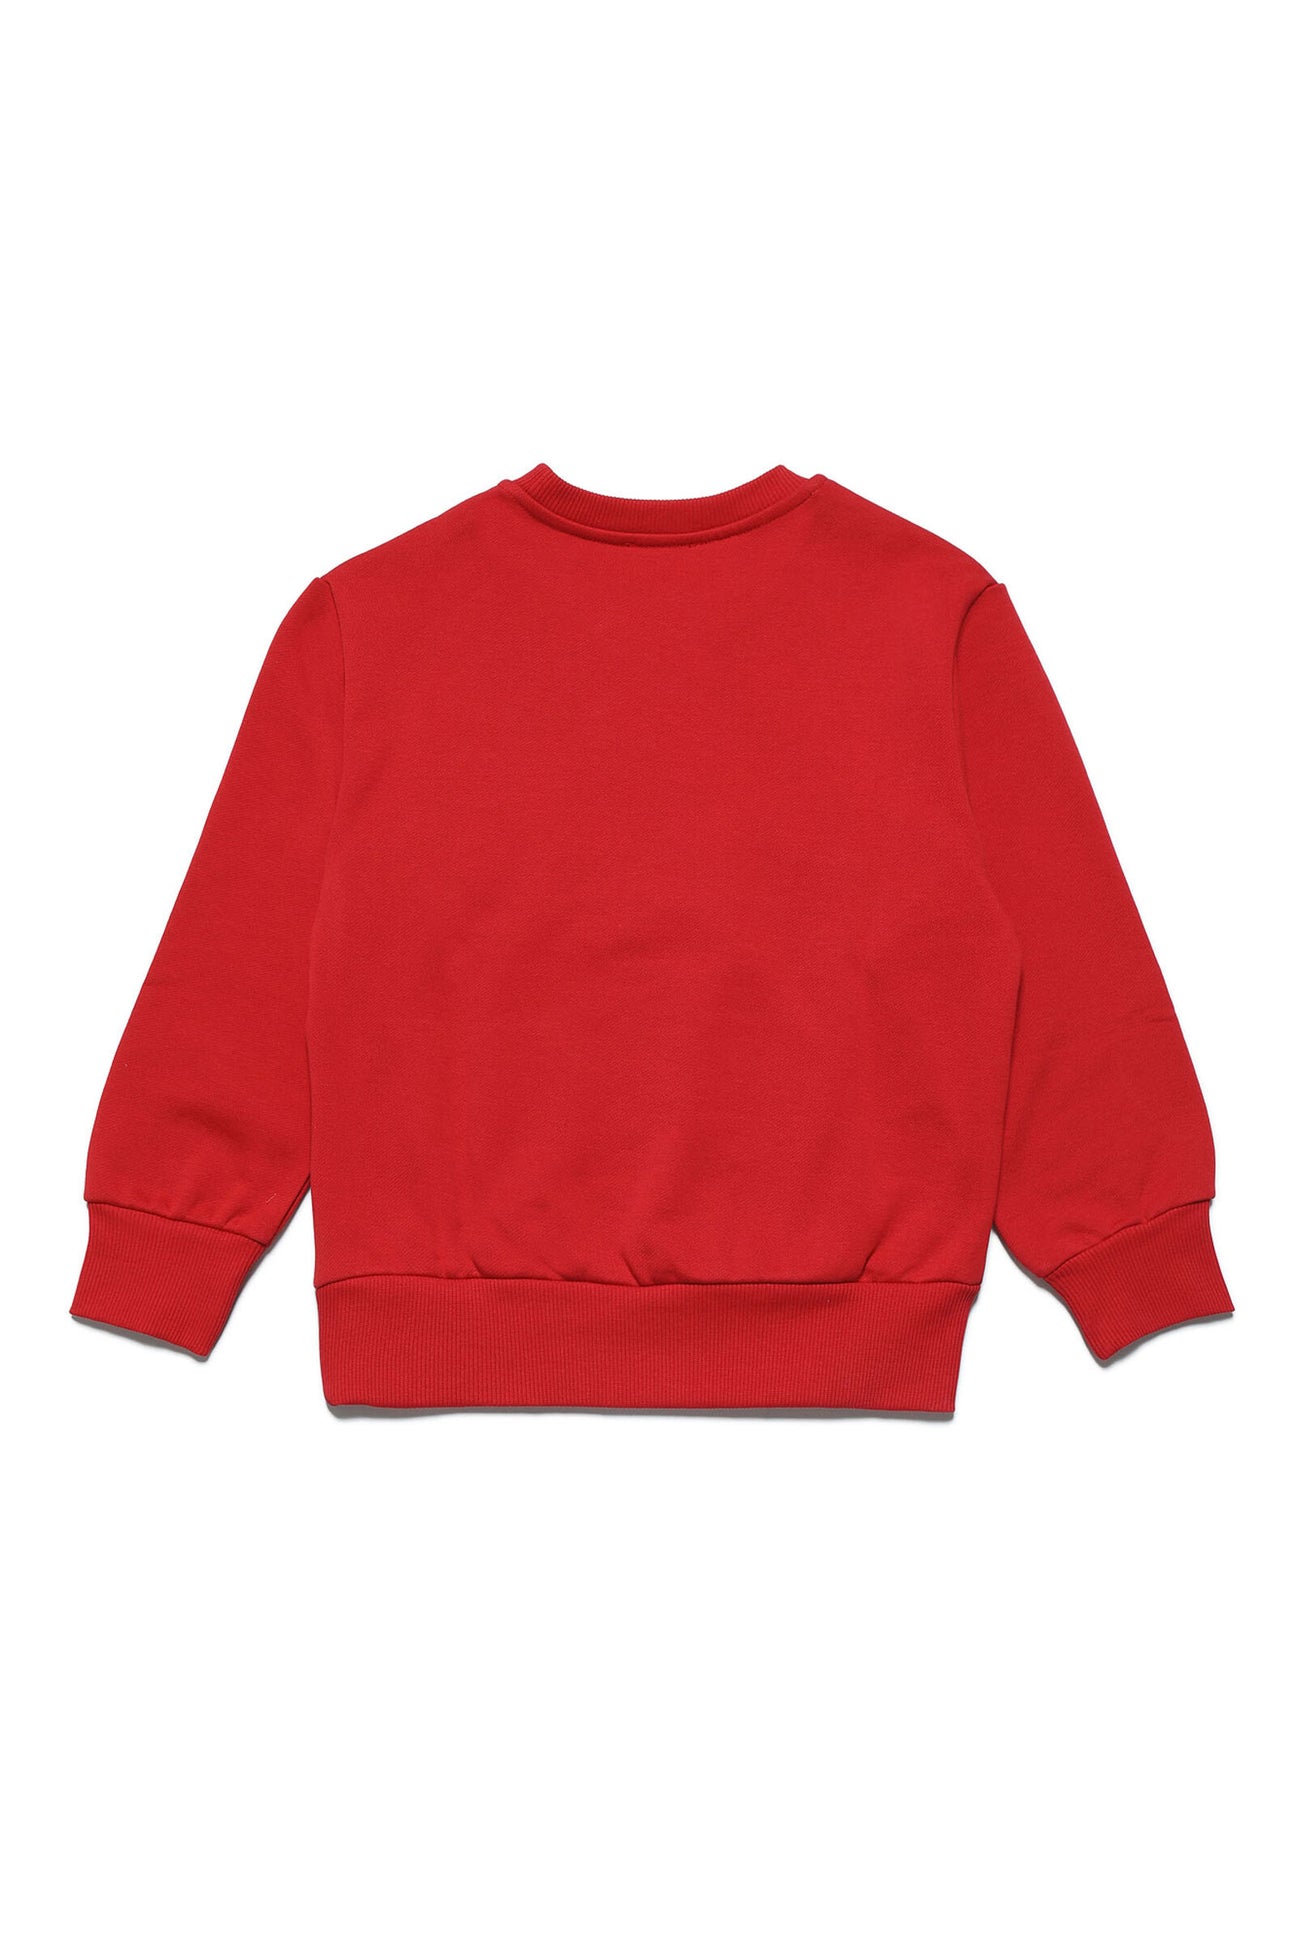 Cotton crew-neck sweatshirt with sectioned logo Cotton crew-neck sweatshirt with sectioned logo